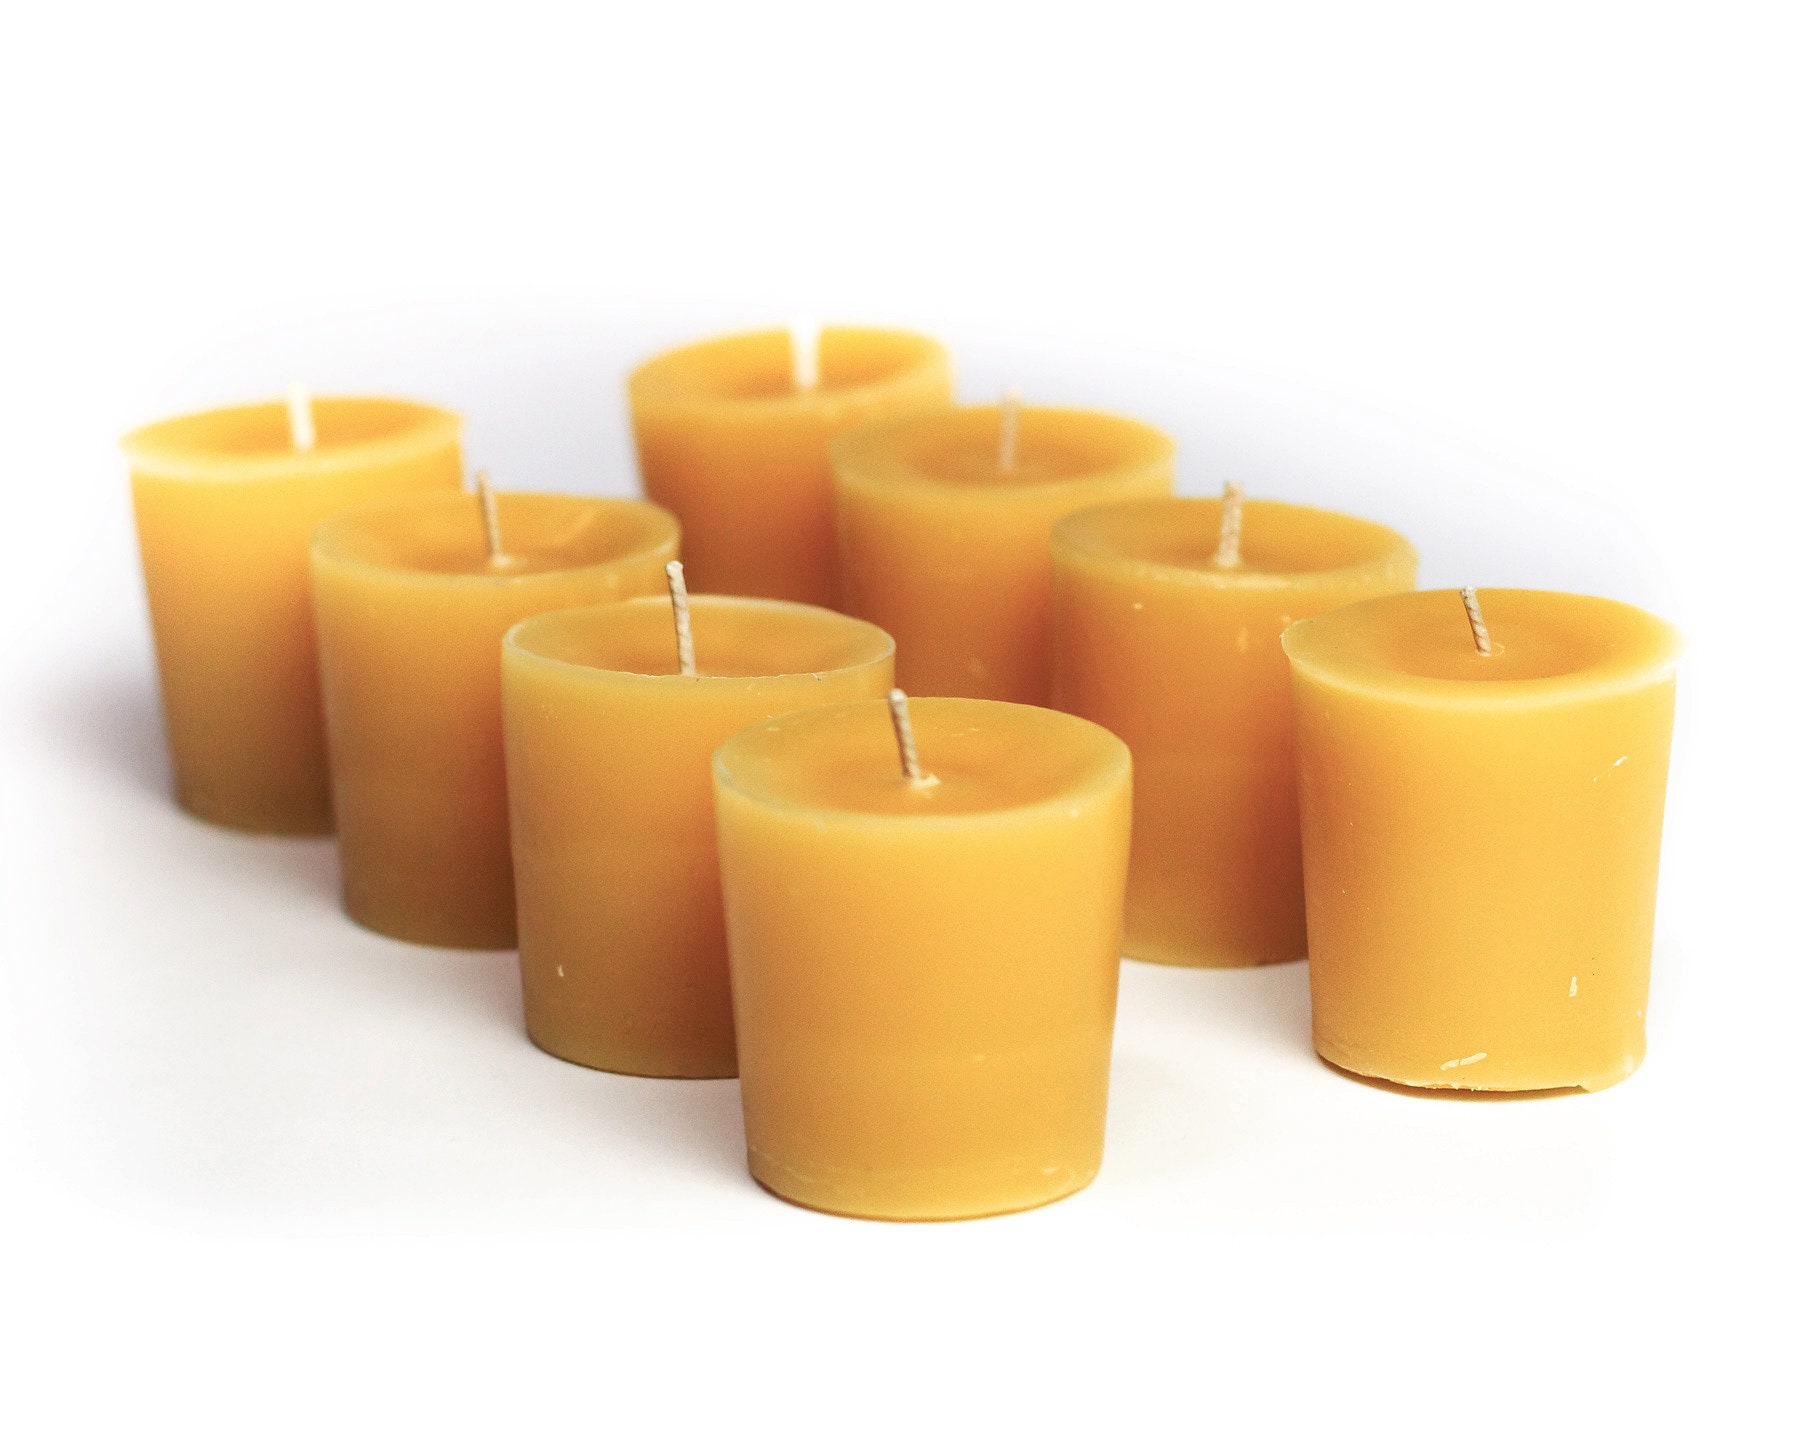 LX 16, 6 Pretabbed Candle Wicks for Votive Candles